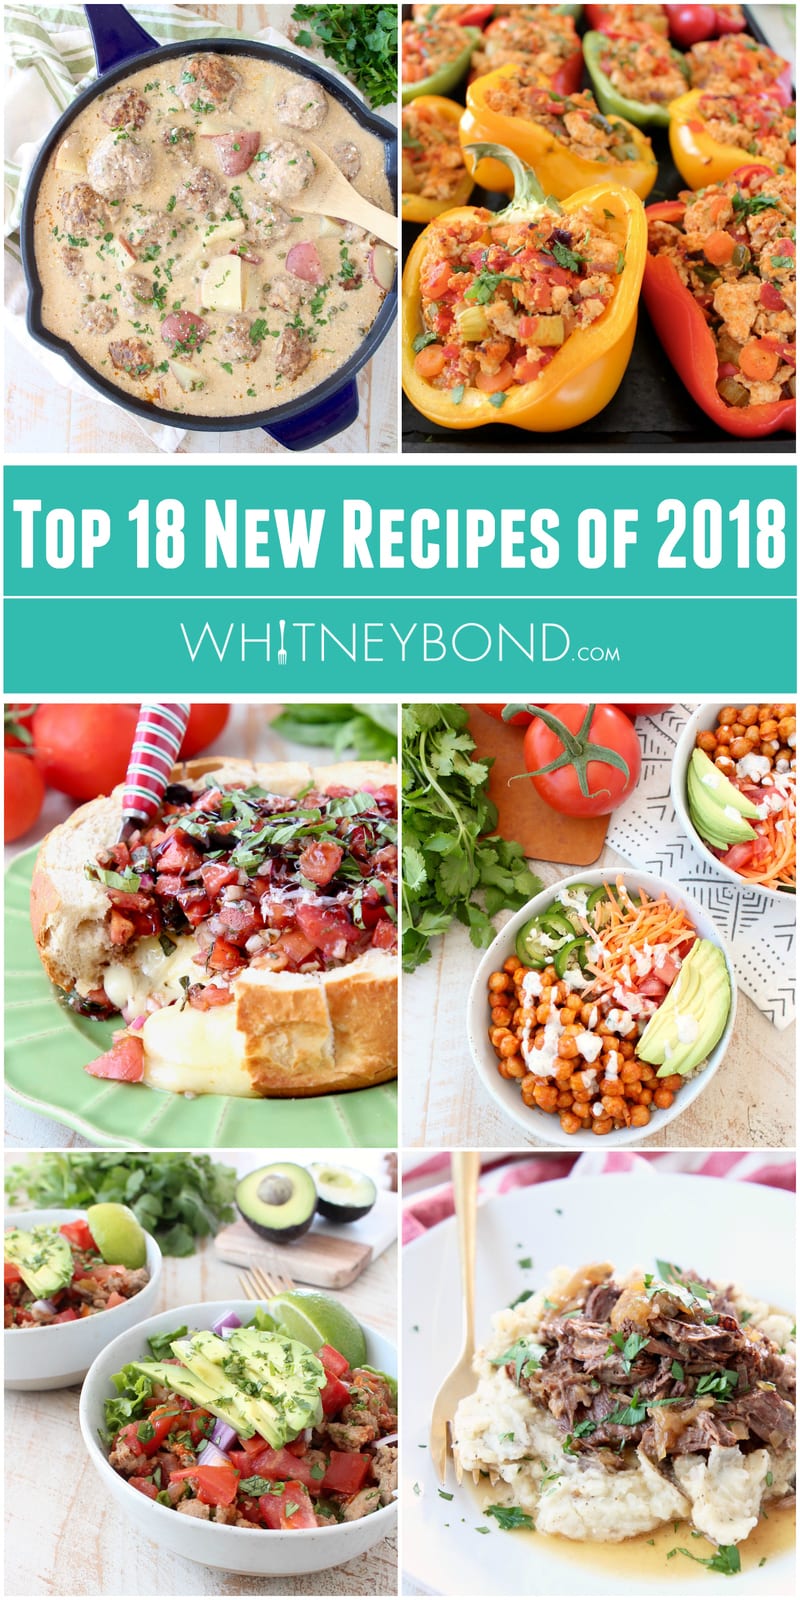 Collage of 6 images of recipes with text overlay "top 18 new recipes of 2018, WhitneyBond.com"